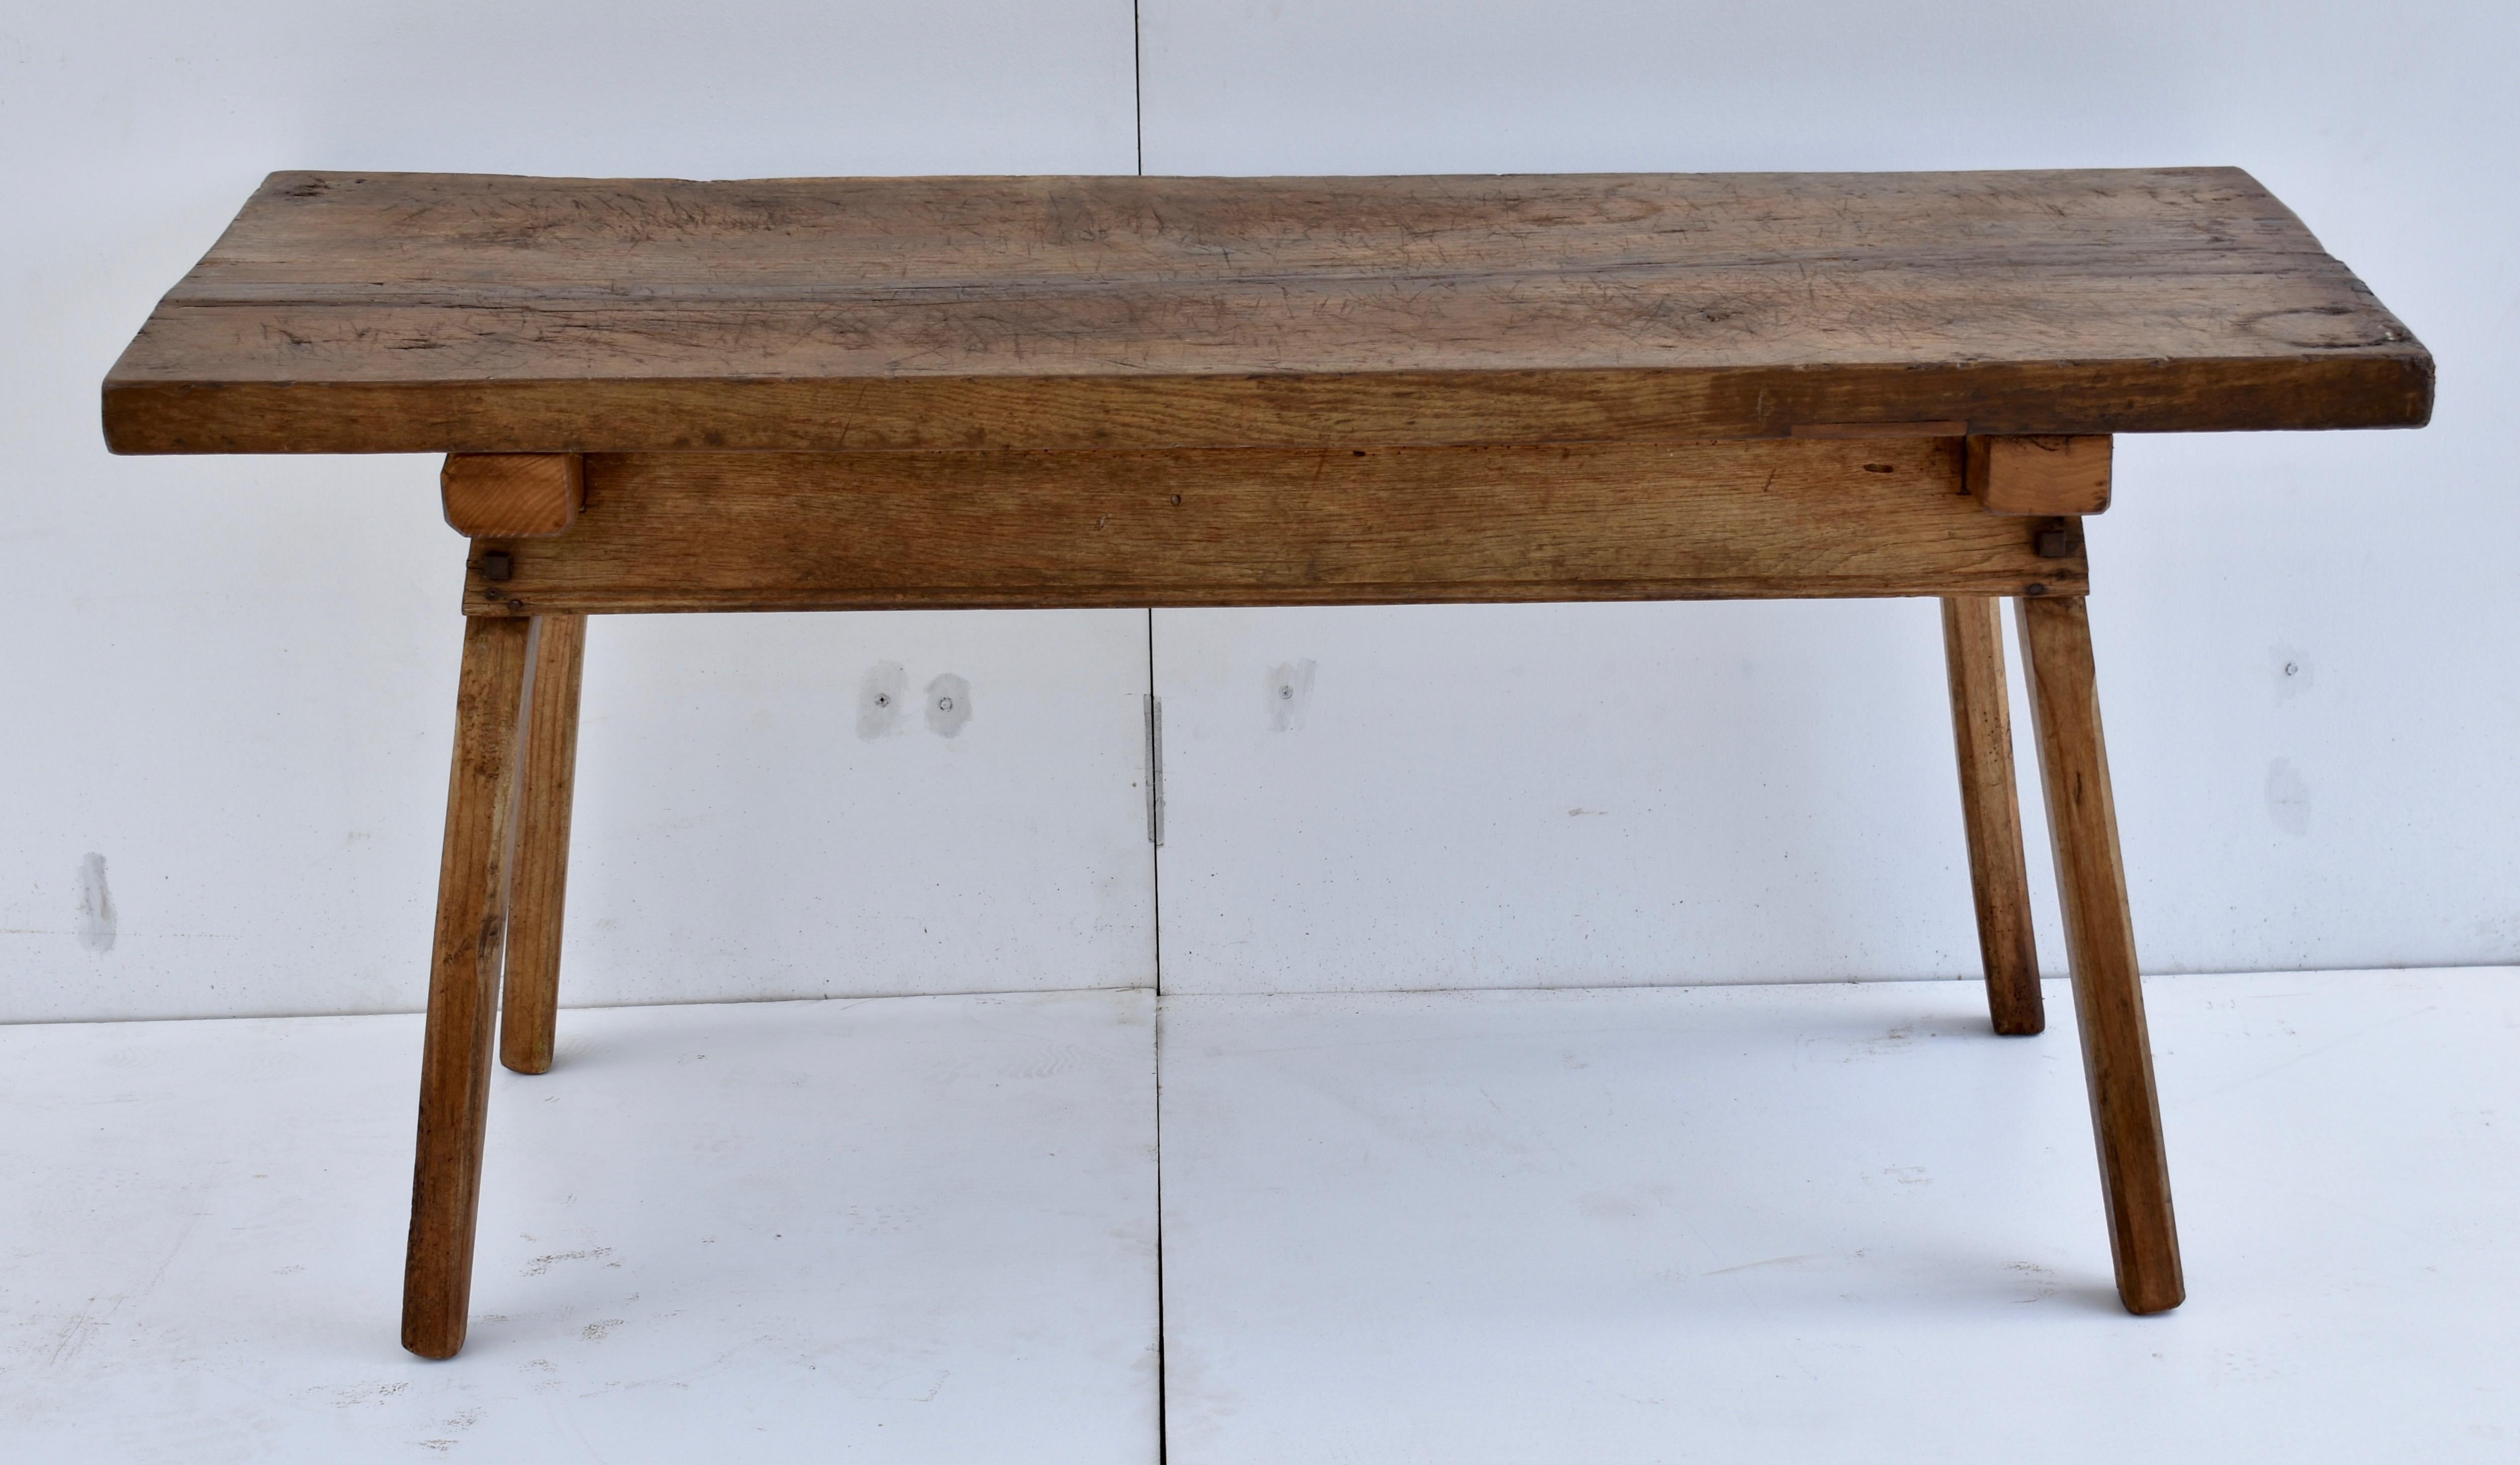 The top of this magnificent pig bench is a single massive slab of oak over two feet wide and two inches thick, beautifully chopped and scratched through decades of relatively light but purposeful use. The heavy oak legs, about 2.5” square at the